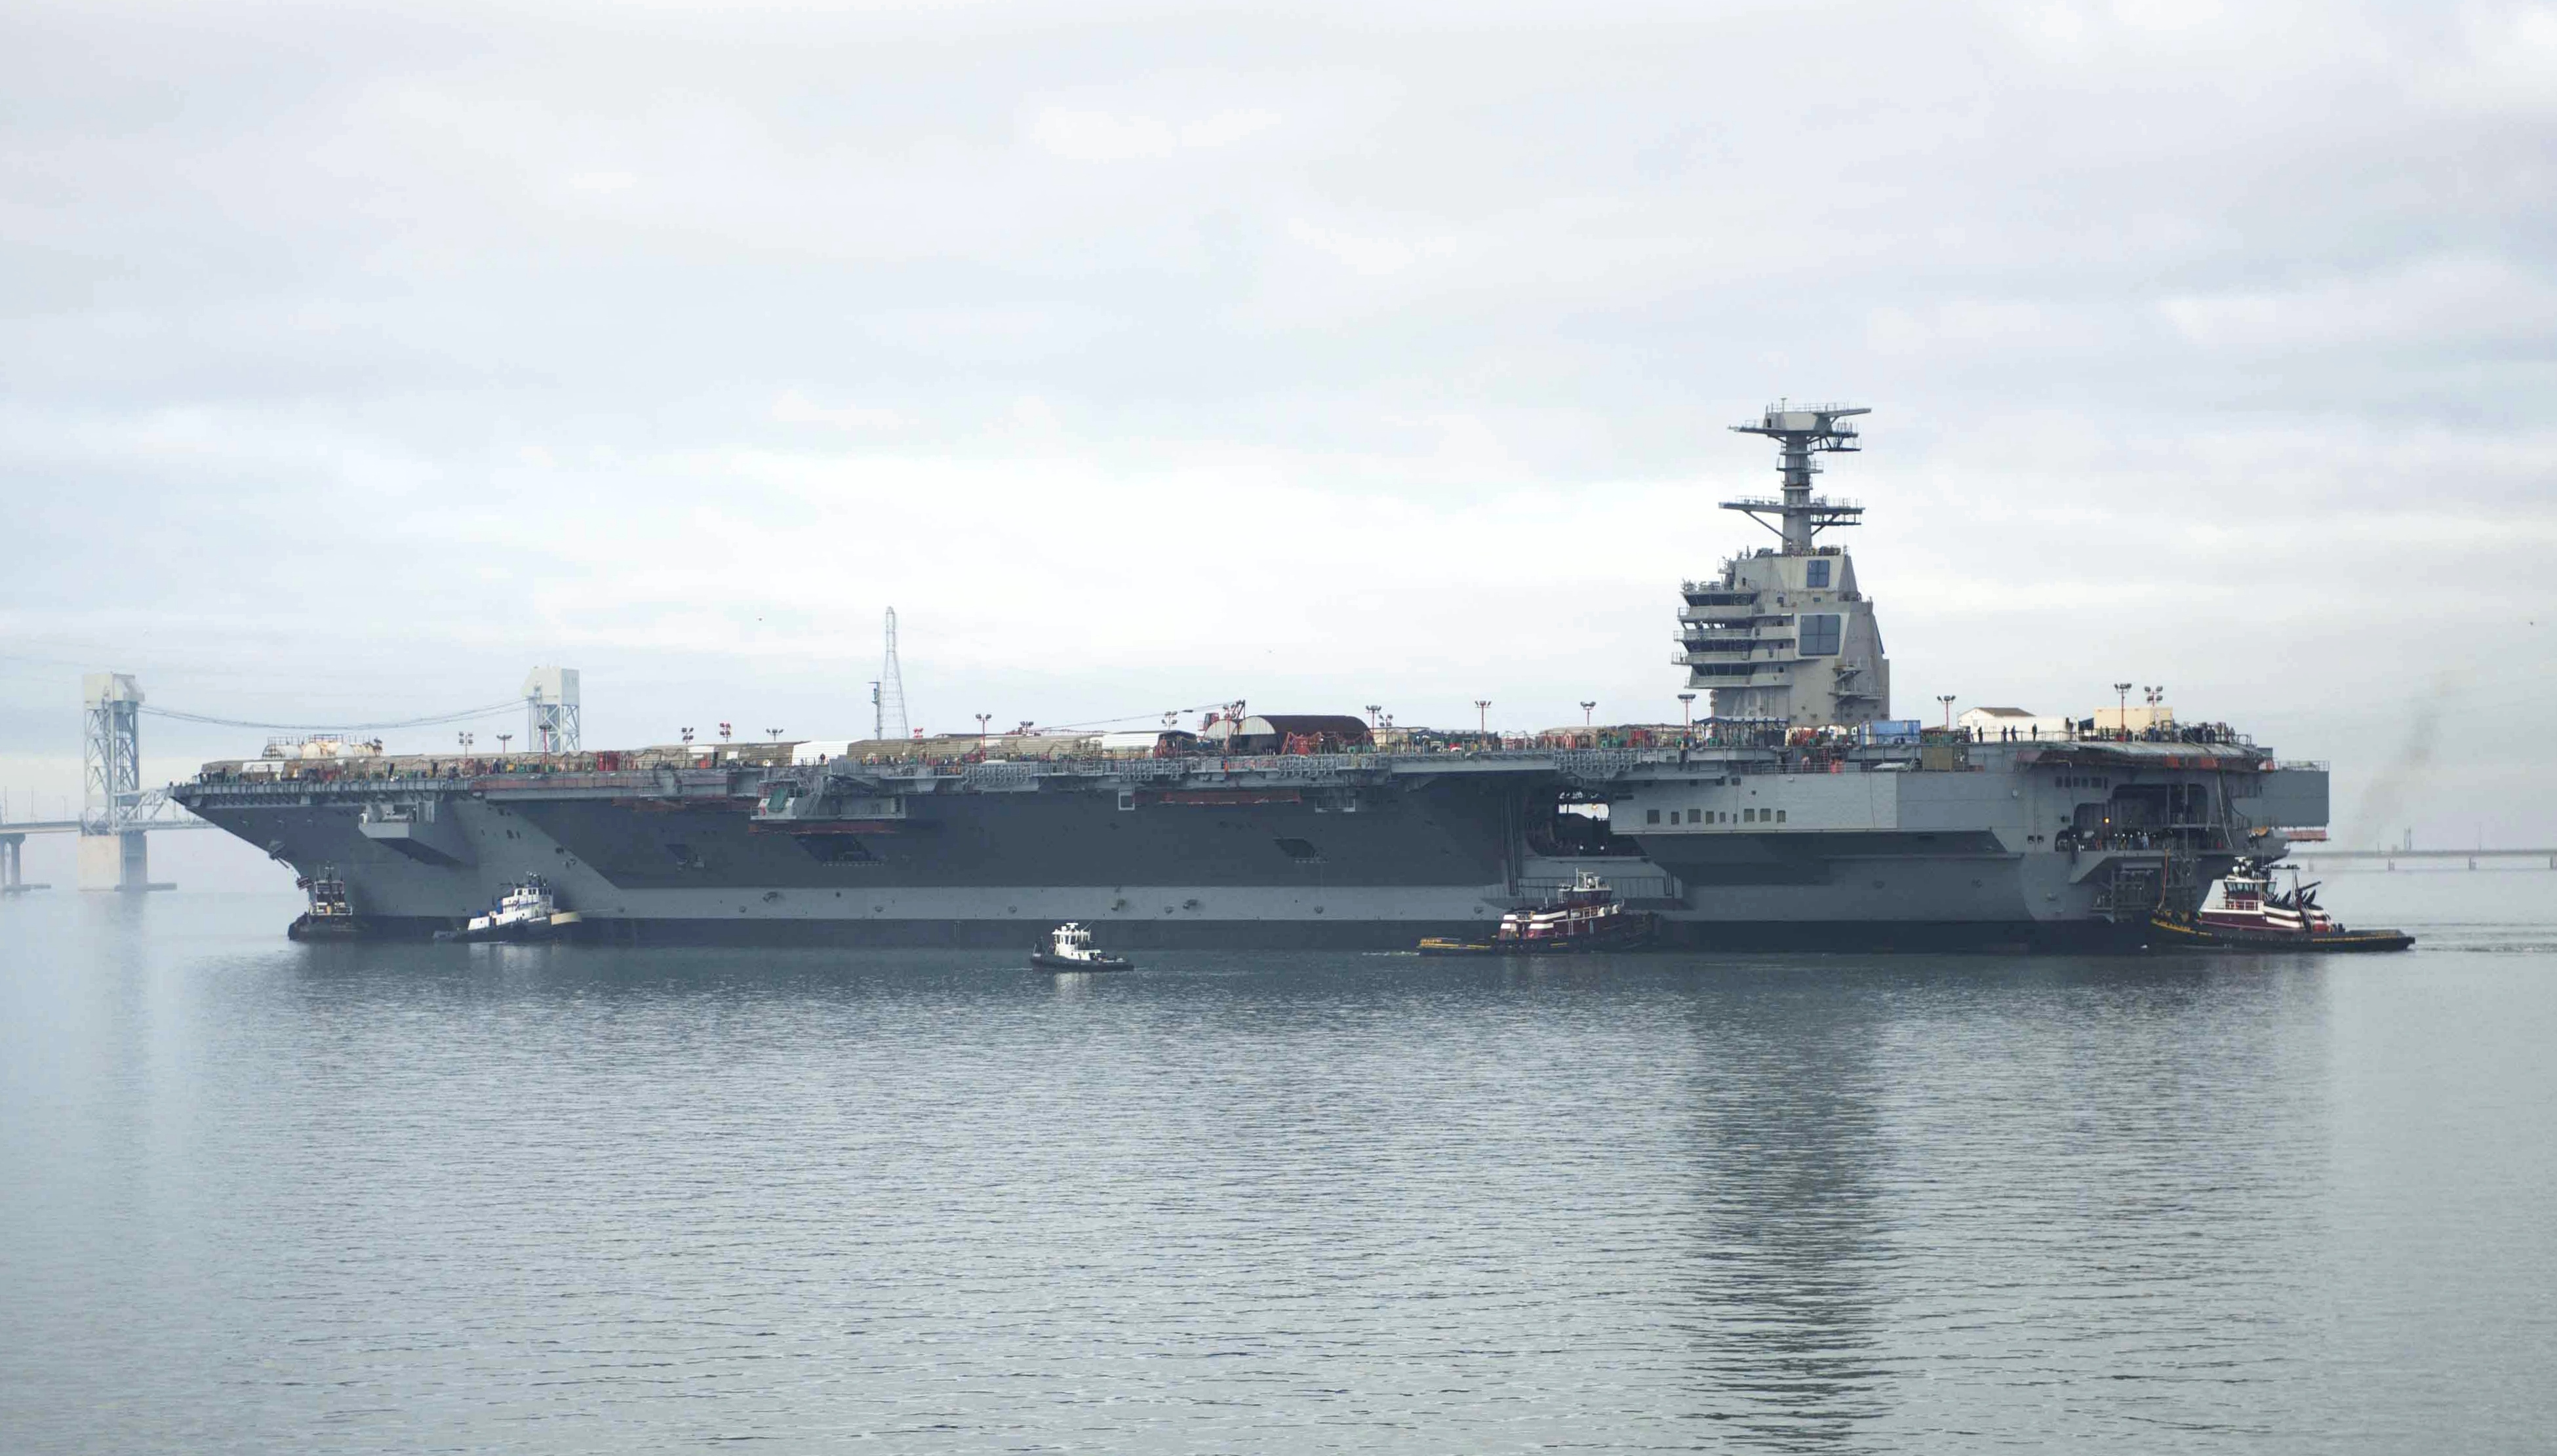 USS_Gerald_R._Ford_(CVN-78)_on_the_James_River_in_2013[1].JPG